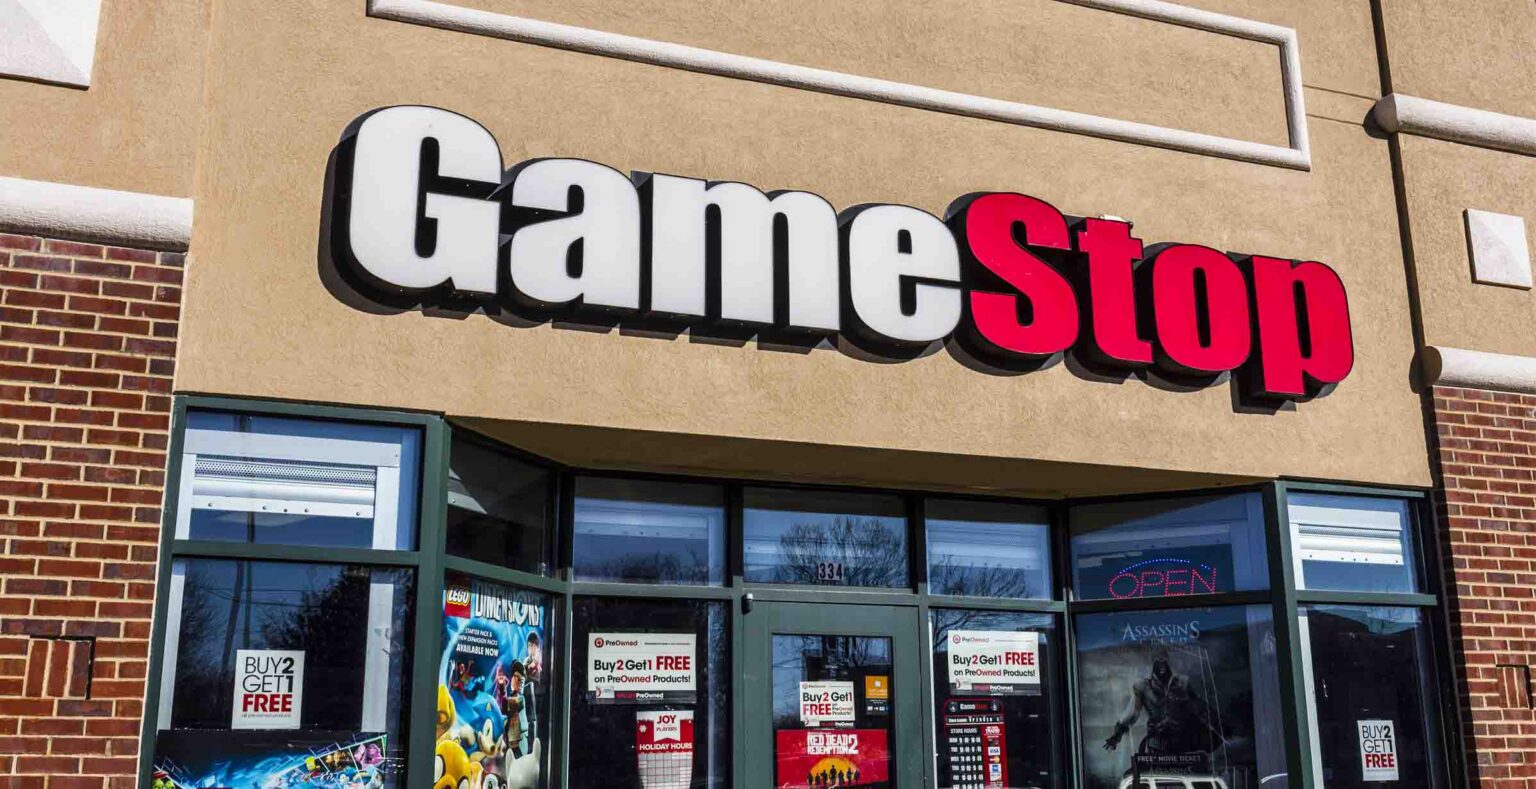 Gamers know that GameStop trade-in values are pathetic and its led to a new genre of memes. Here are the best ones.